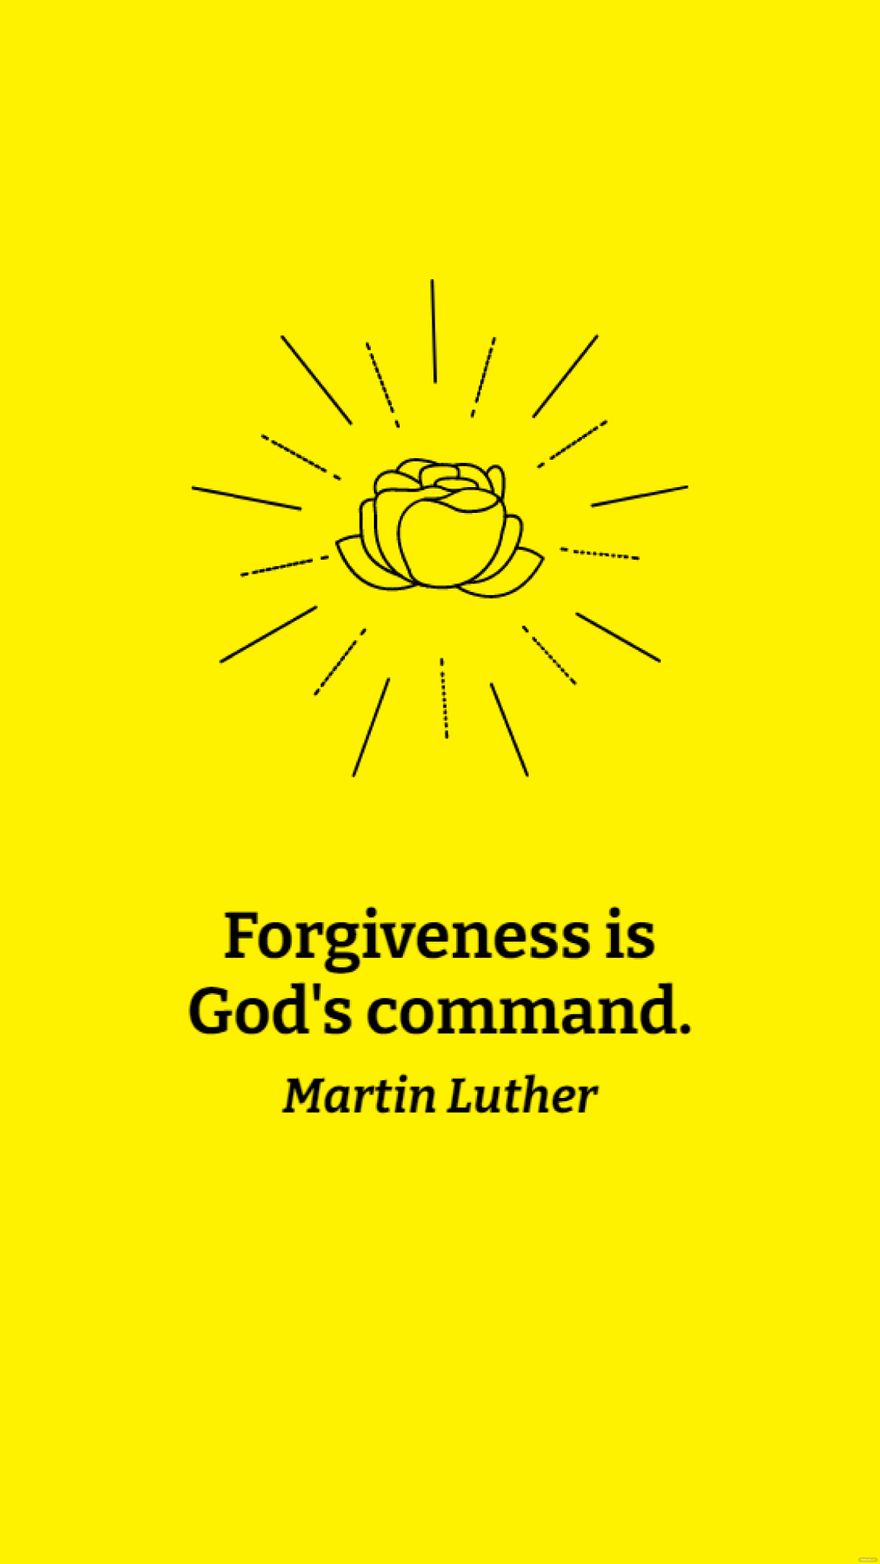 Martin Luther - Forgiveness is God's command.